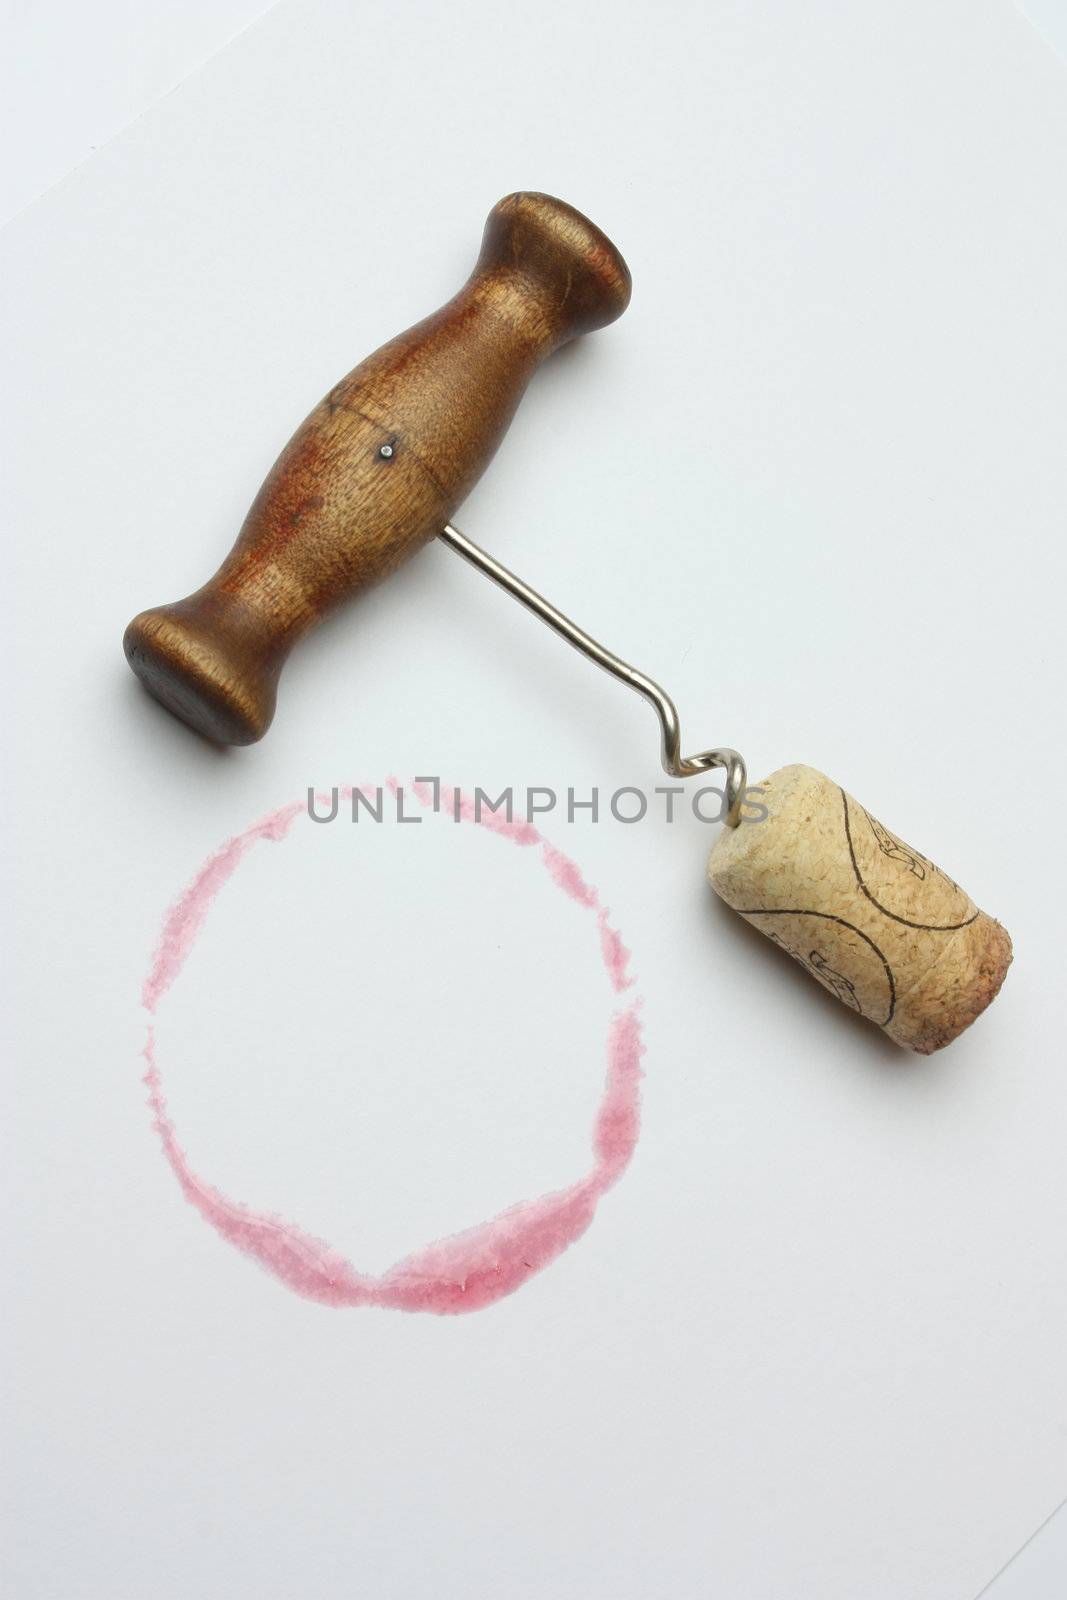 corkscrew and cork on a white background